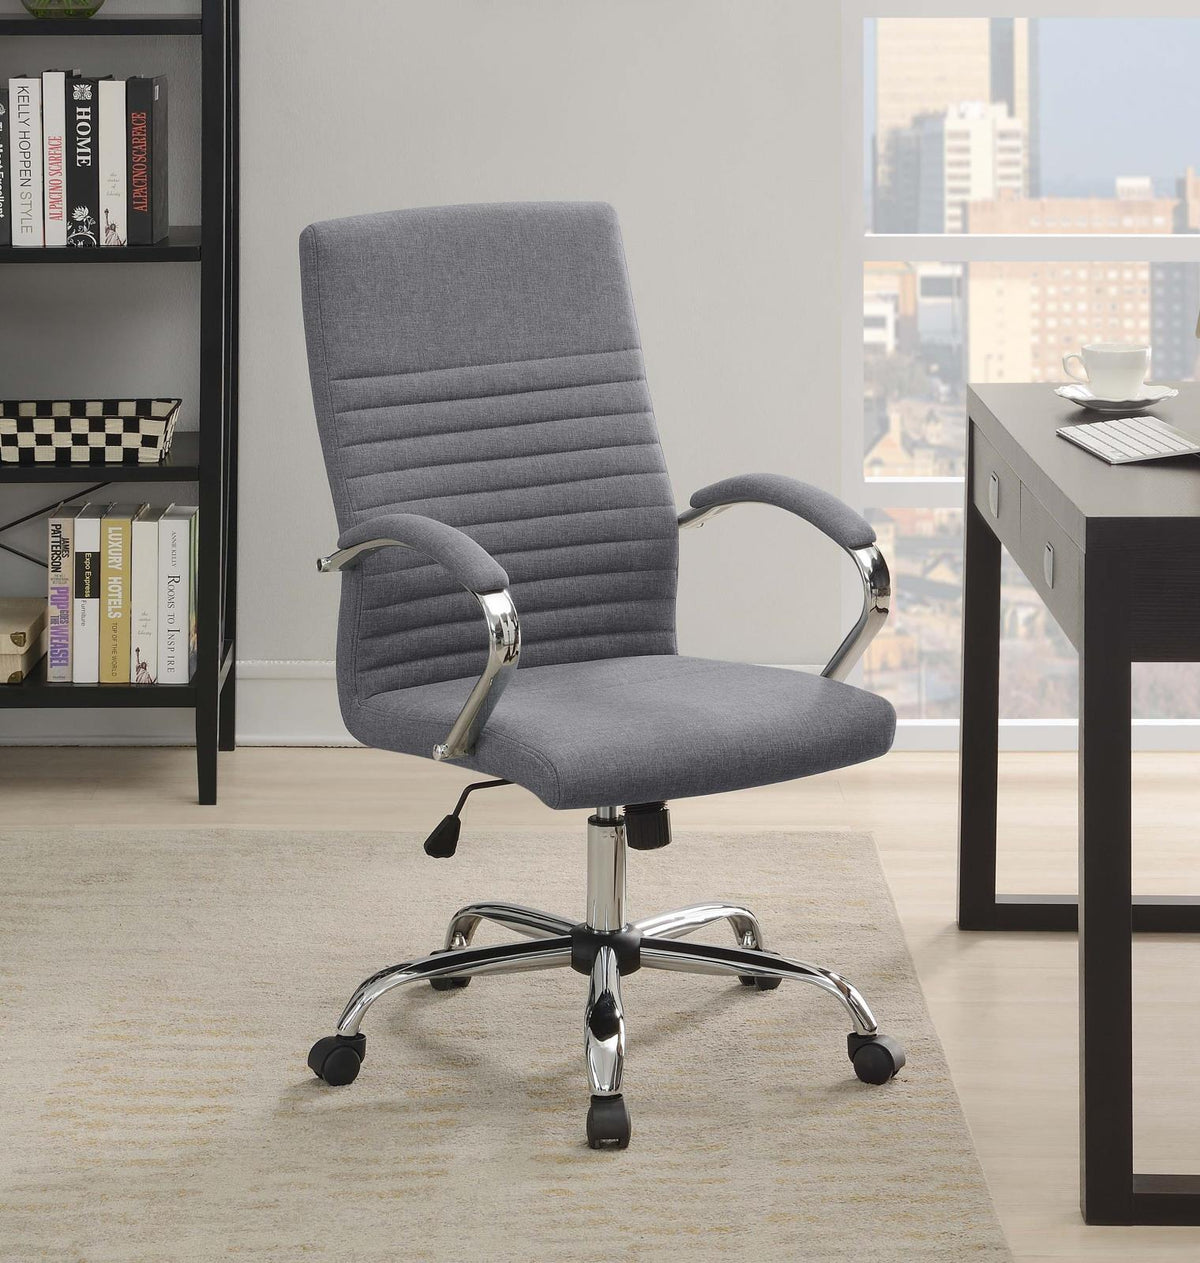 Abisko Upholstered Office Chair with Casters Grey and Chrome Abisko Upholstered Office Chair with Casters Grey and Chrome Half Price Furniture